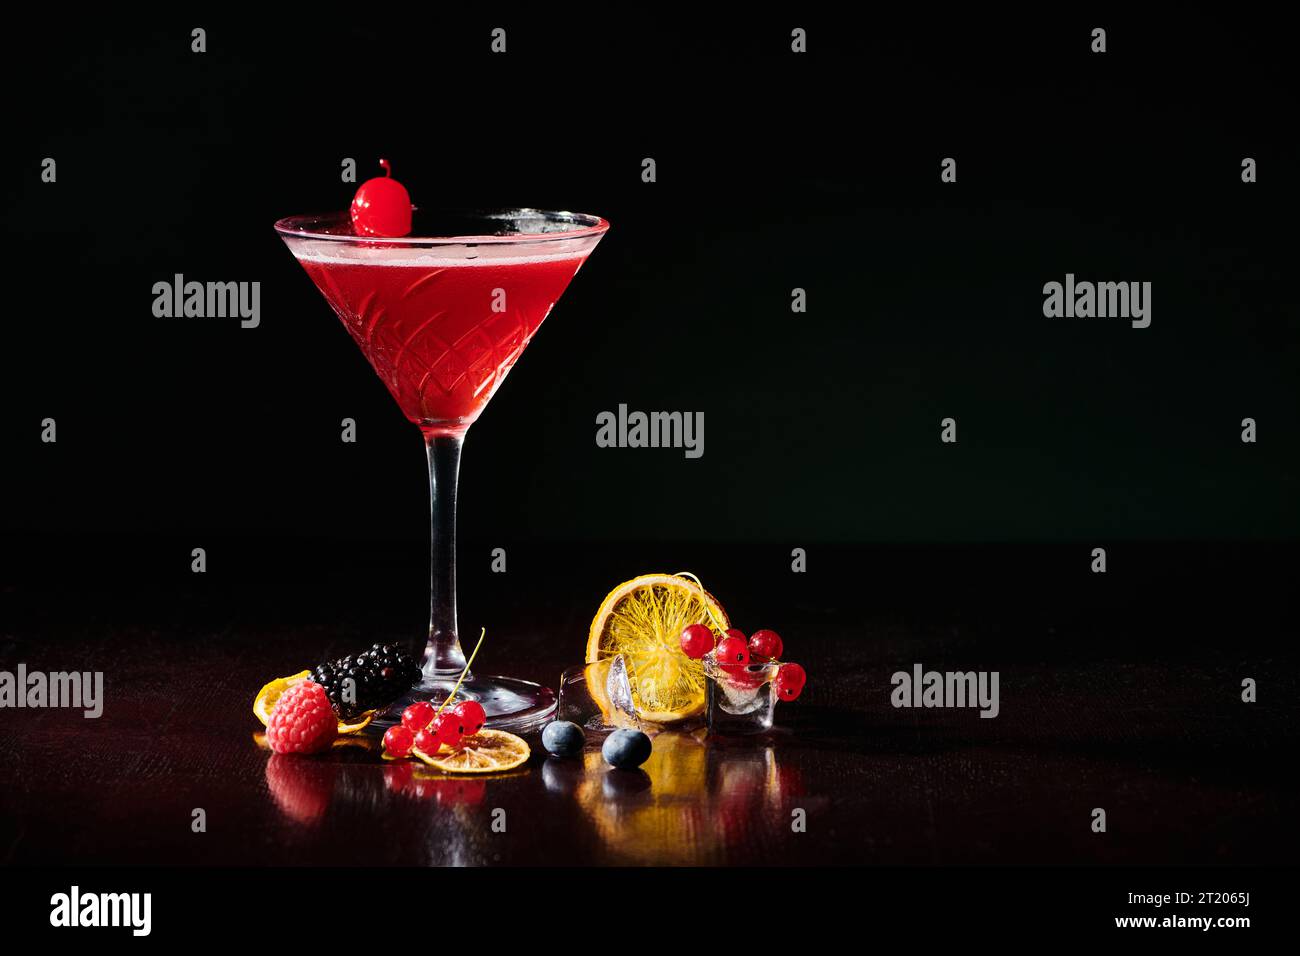 freshening cosmopolitan garnished with cocktail cherry on black background, concept Stock Photo